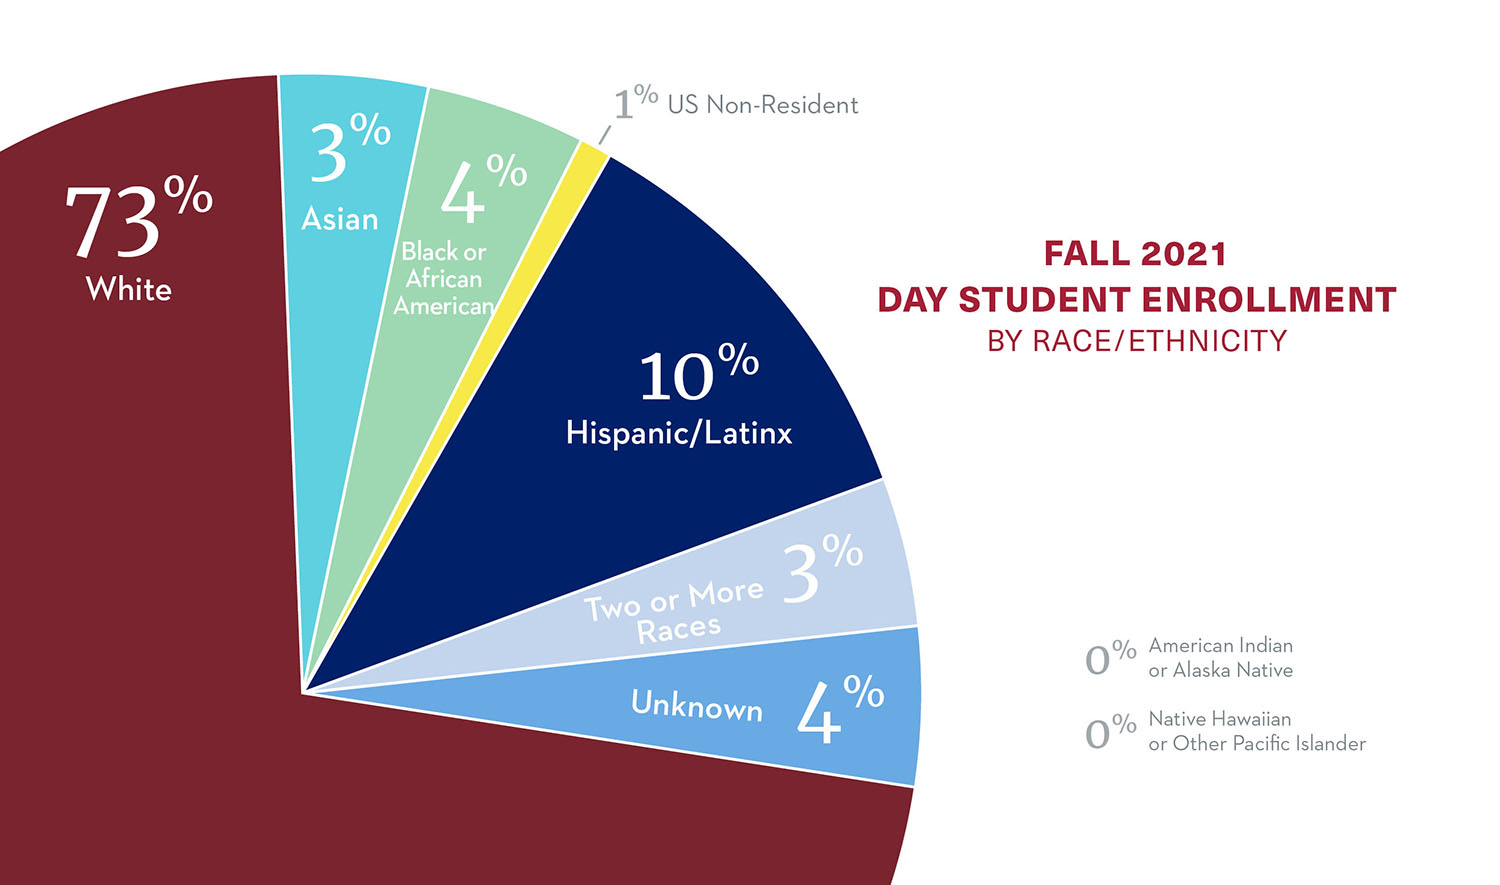 Fall 2021 day student enrollment by race & ethnicity.